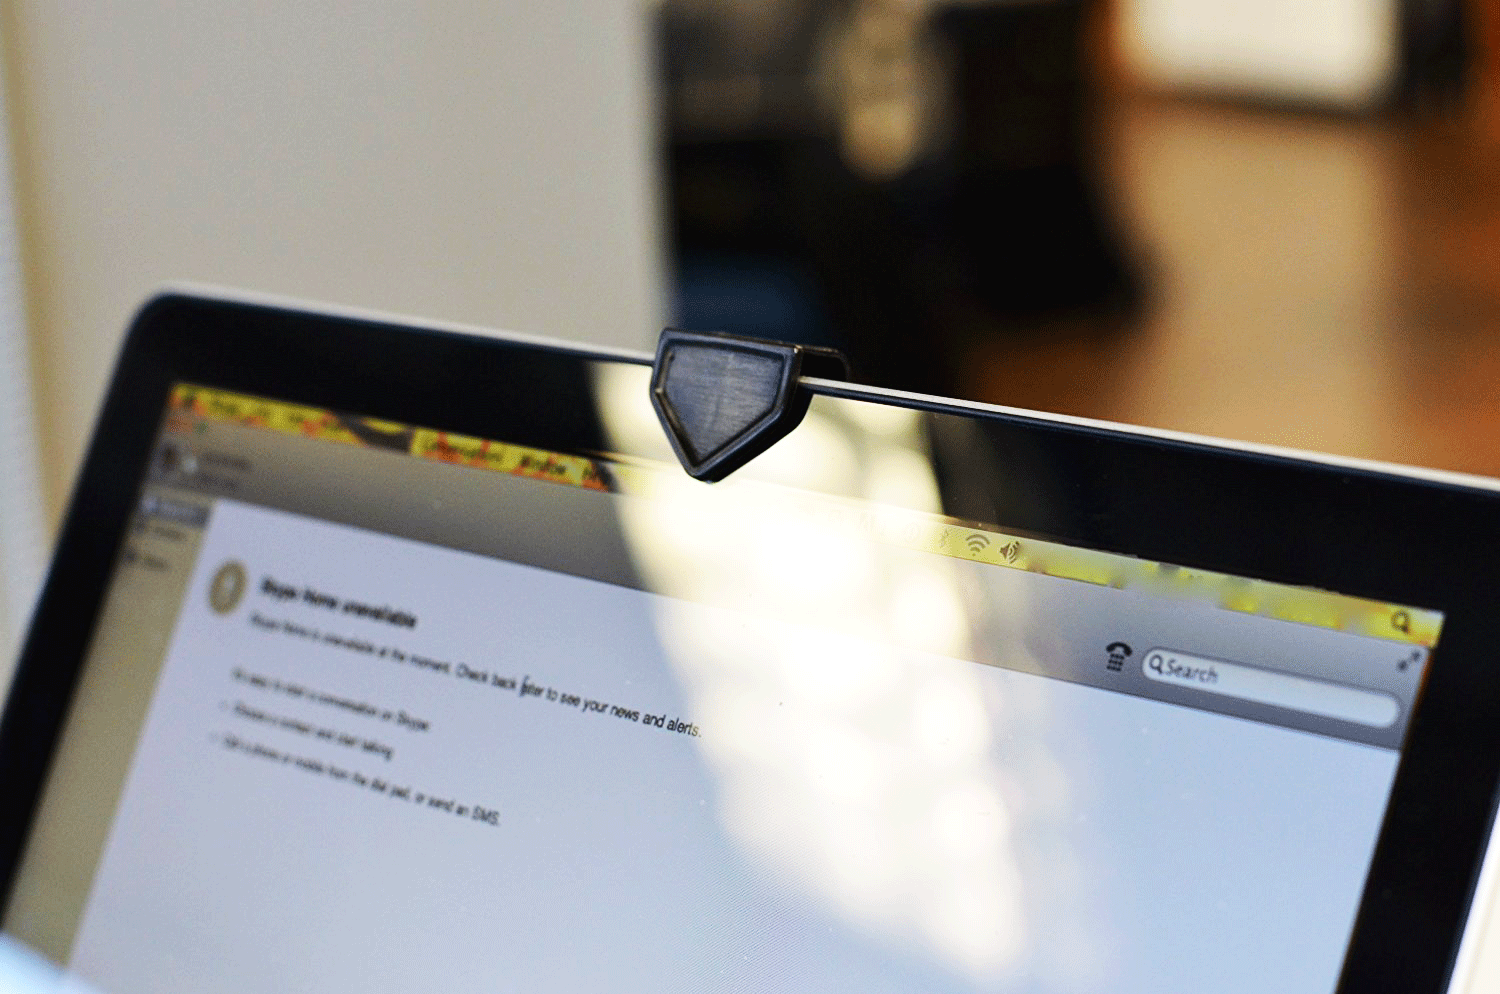 Online security tips: Cover your webcam and phone camera